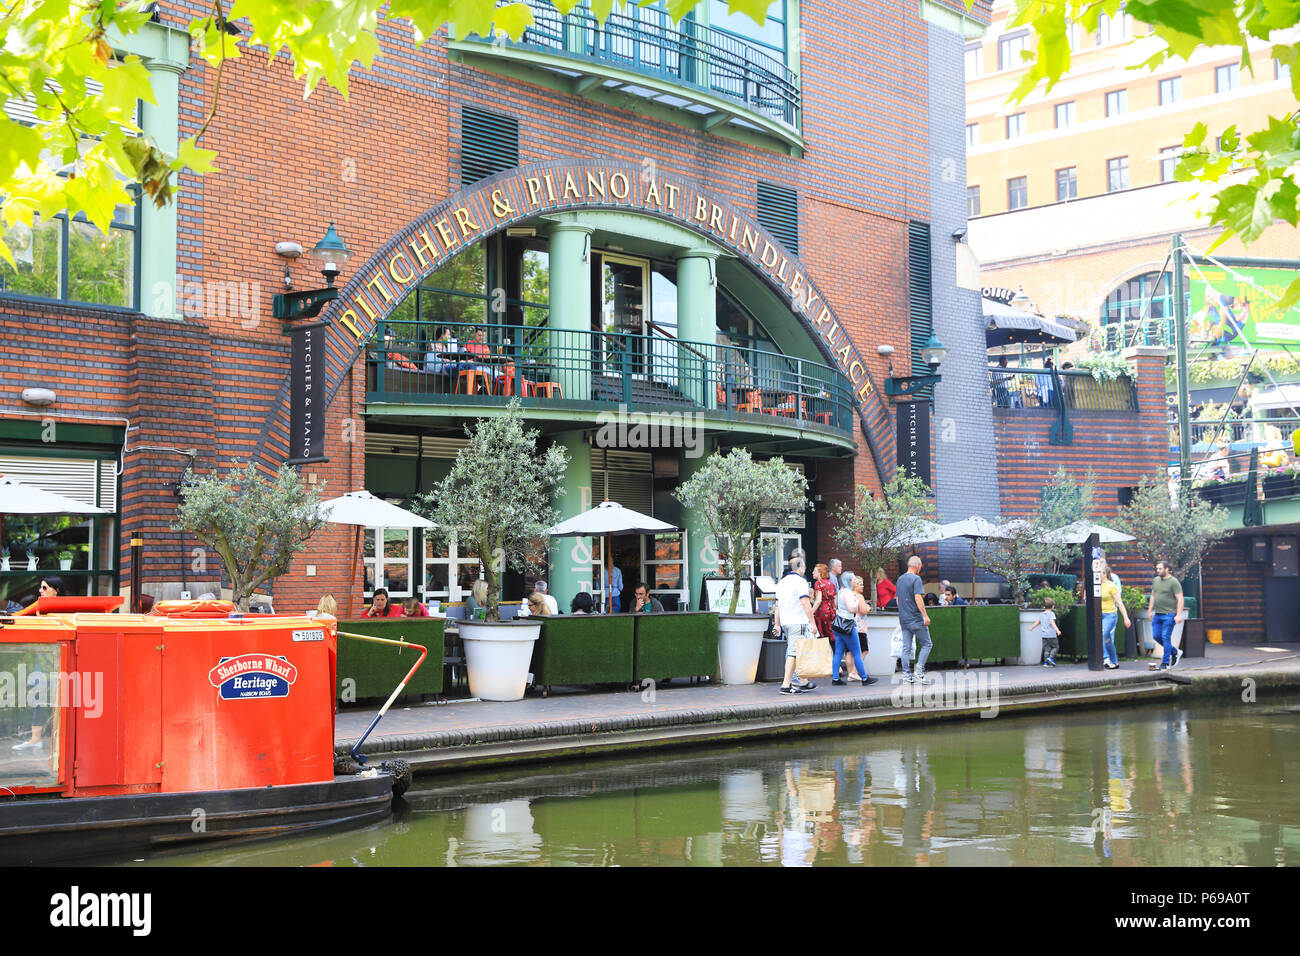 The Picher & Piano restaurant at Brindley Place, the mixed use canalside development in Birmingham, the West Midlands UK. Stock Photo